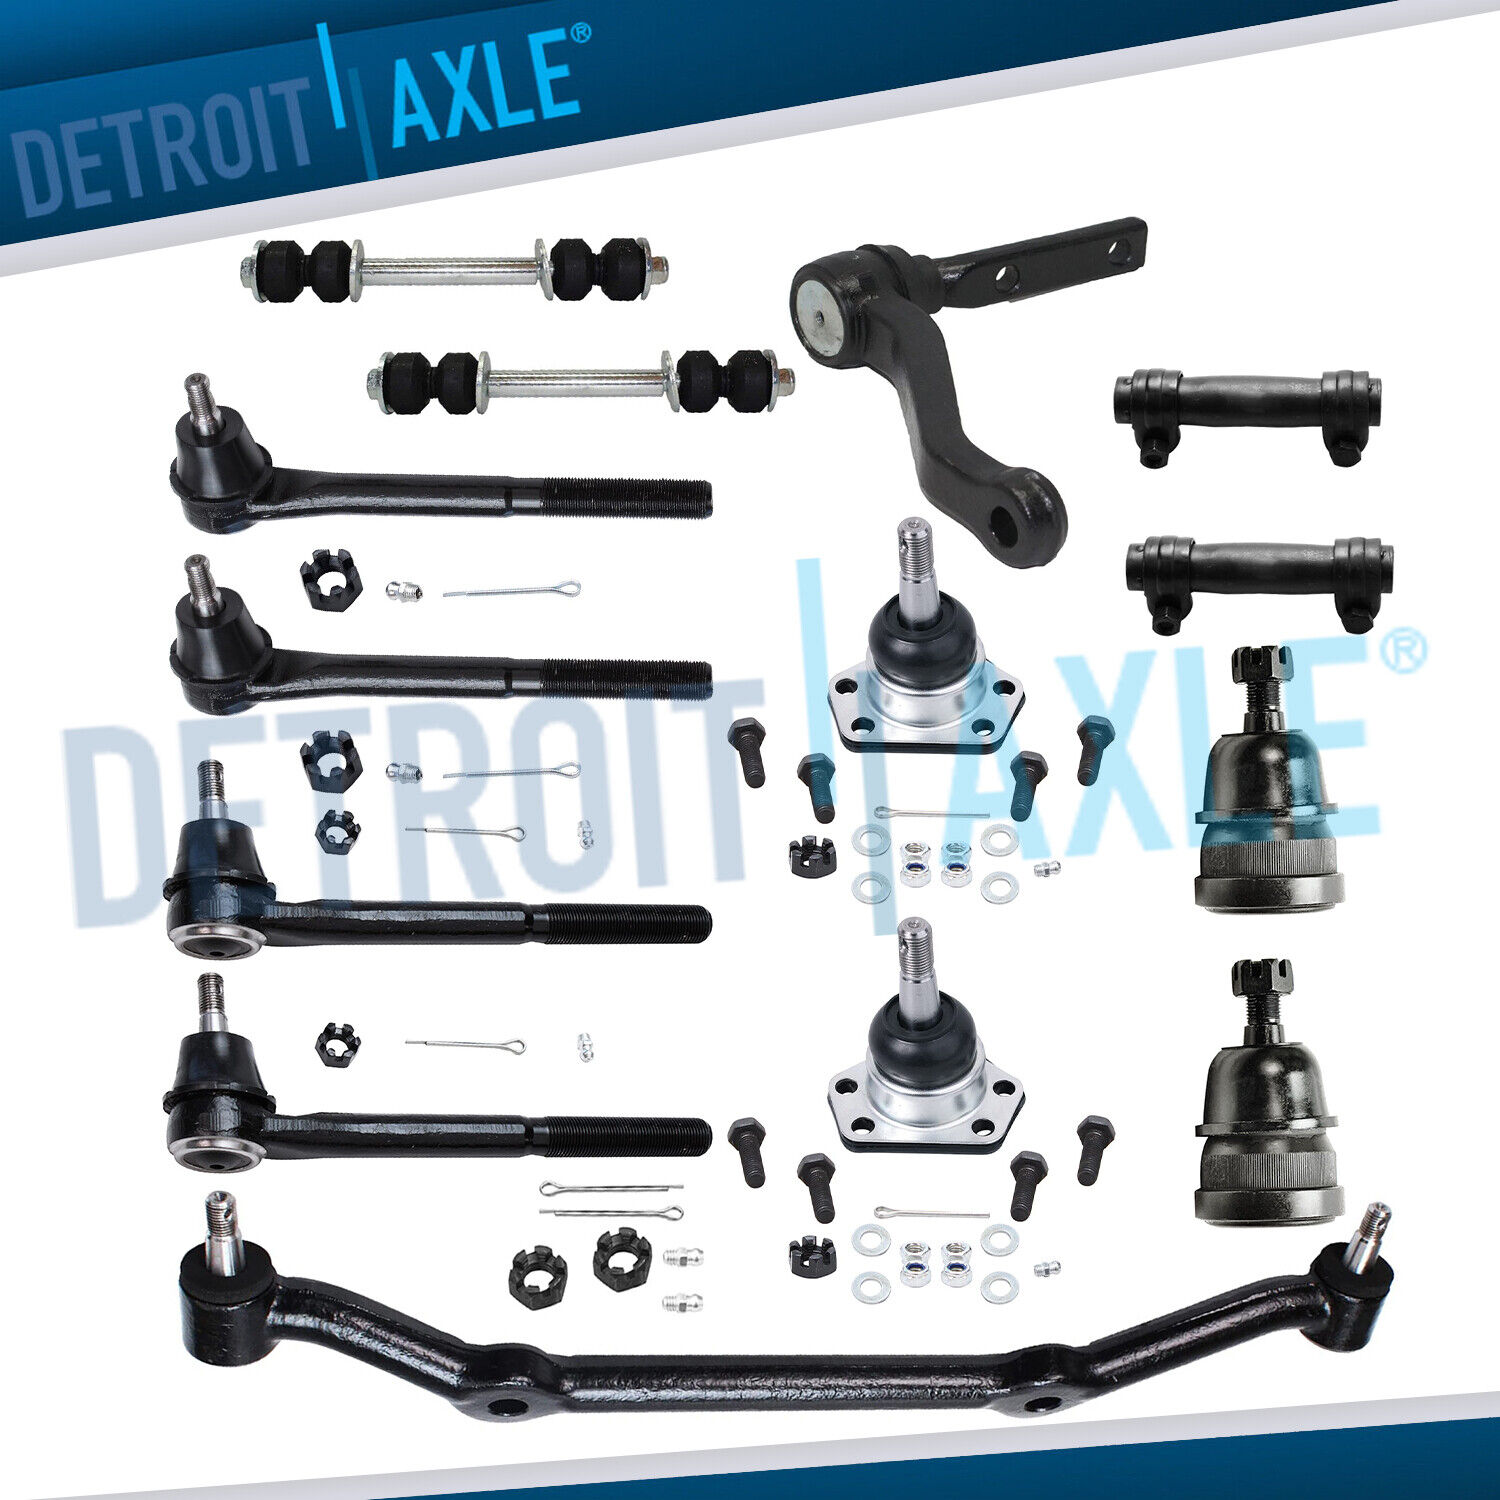 New 14pc Complete Front Suspension Kit for Chevy Blazer S10 and GMC Jimmy 2WD